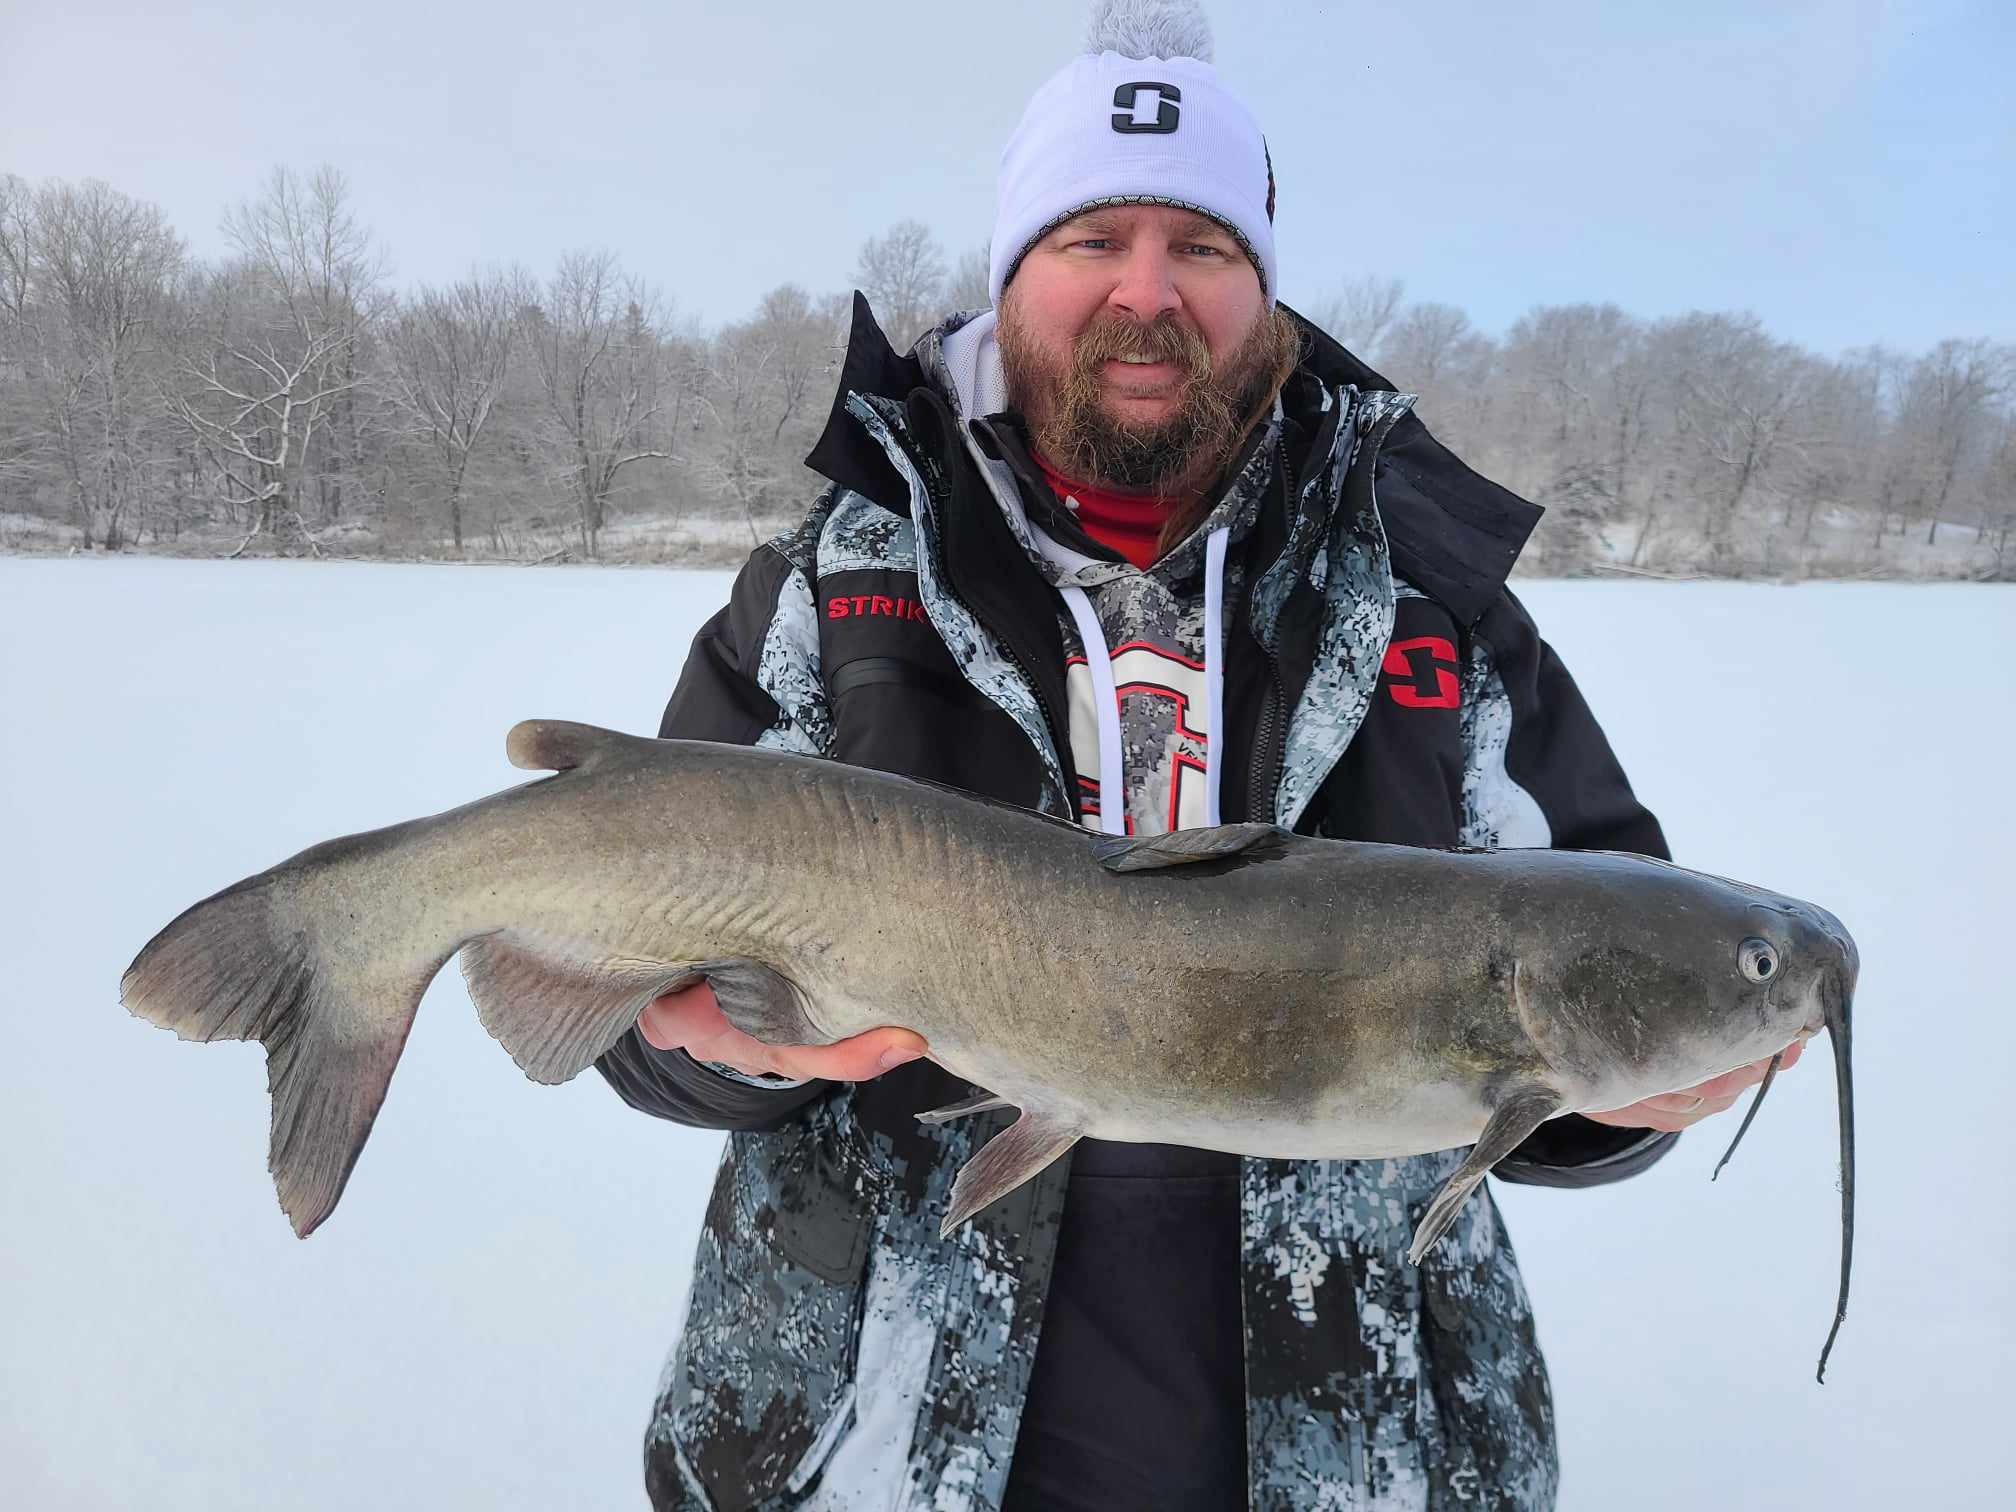 Pro-Staffer Troy Hansen holding an impressive channel cat caught through the ice.